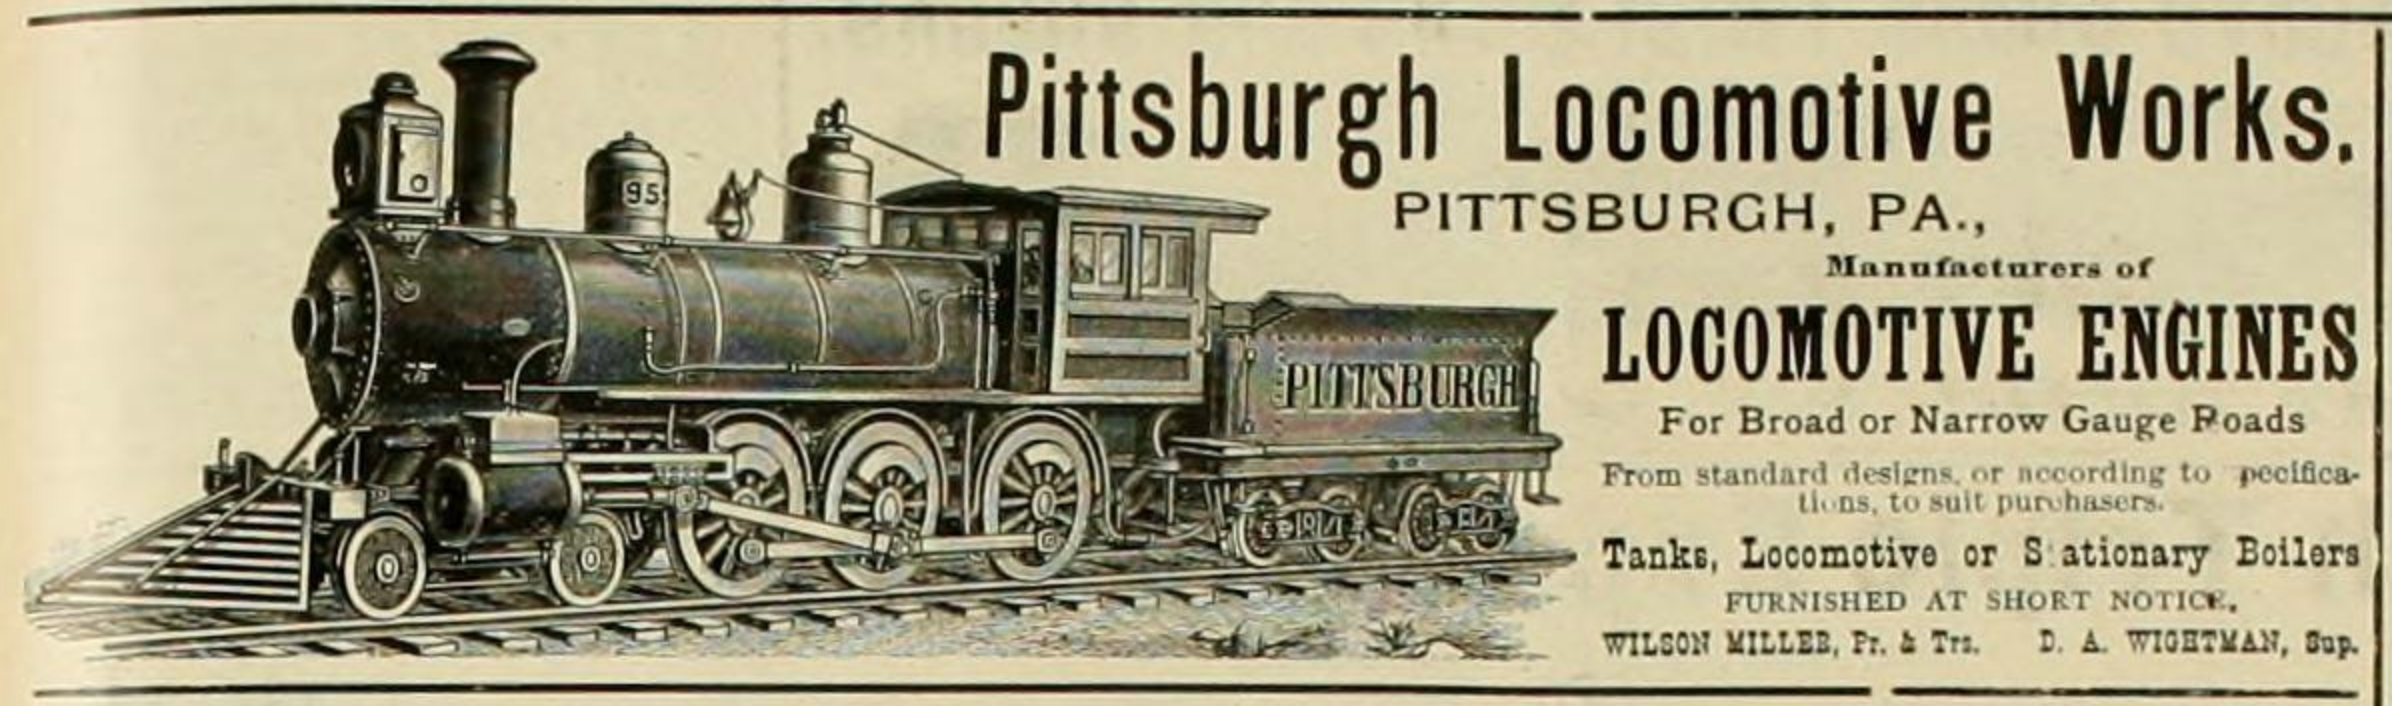 Image of a steam locomotive with the caption Pittsburgh Locomotive Works